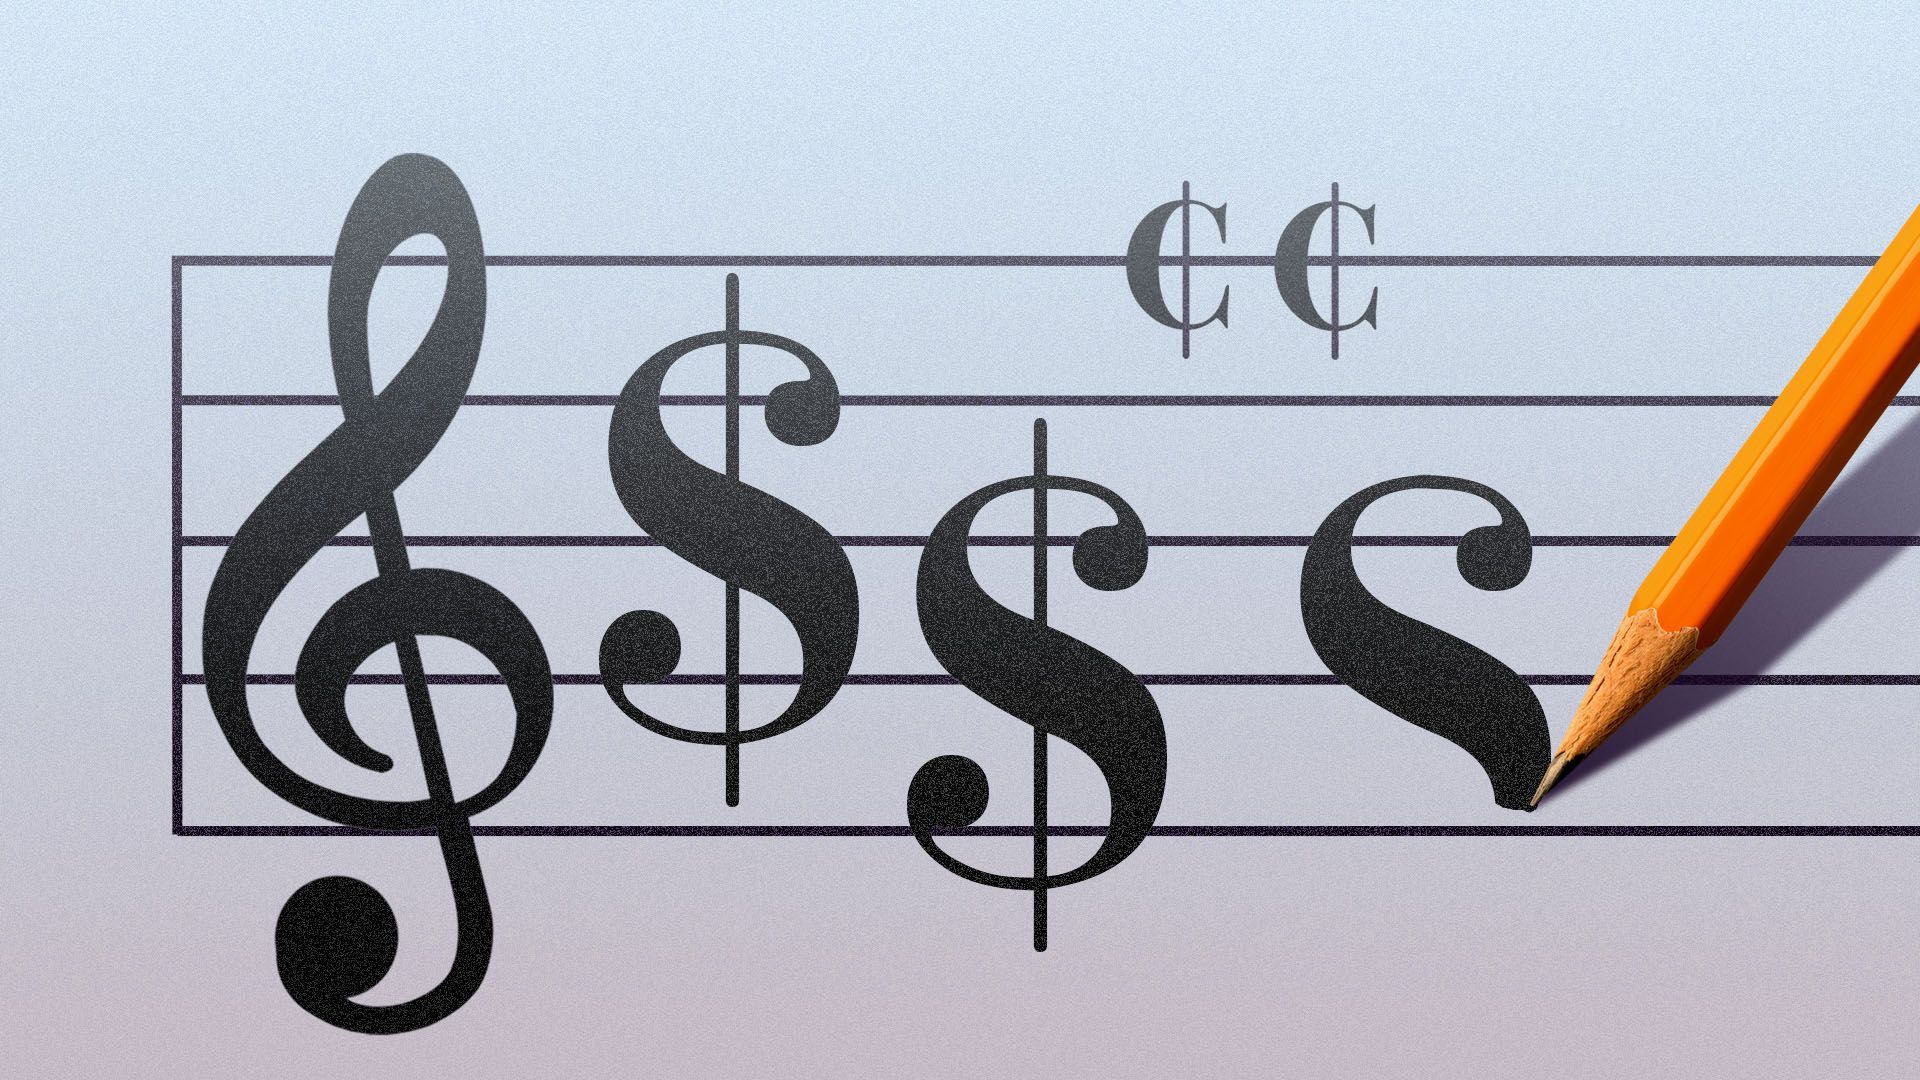 Illustration of a pencil writing sheet music with dollar and cents symbols